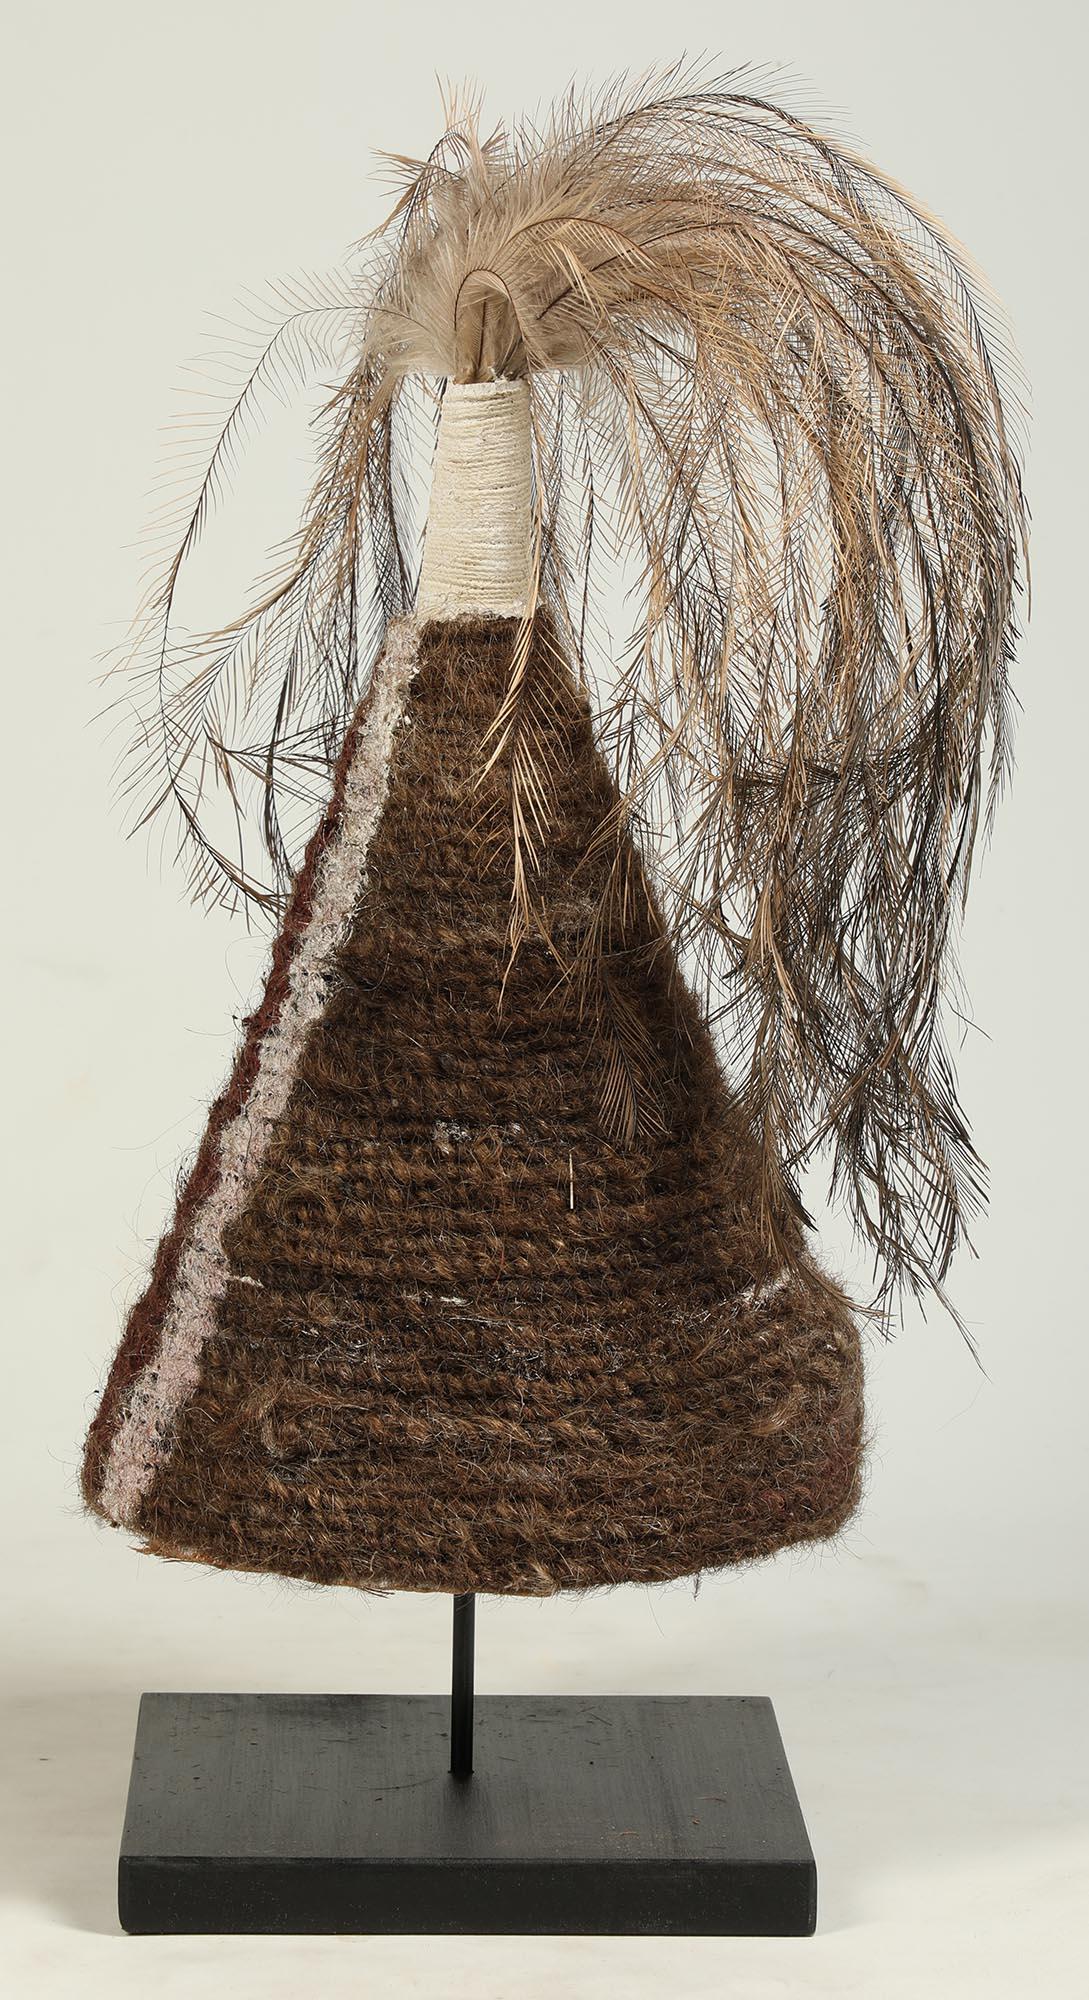 Early to mid-20th century woven fiber and palm leaf conical hat with two vertical painted stripes on the front, from Mornigton Island, Queensland, Australia.
Measures: 16 inches high, on custom wood base, total height 20 inches.
  